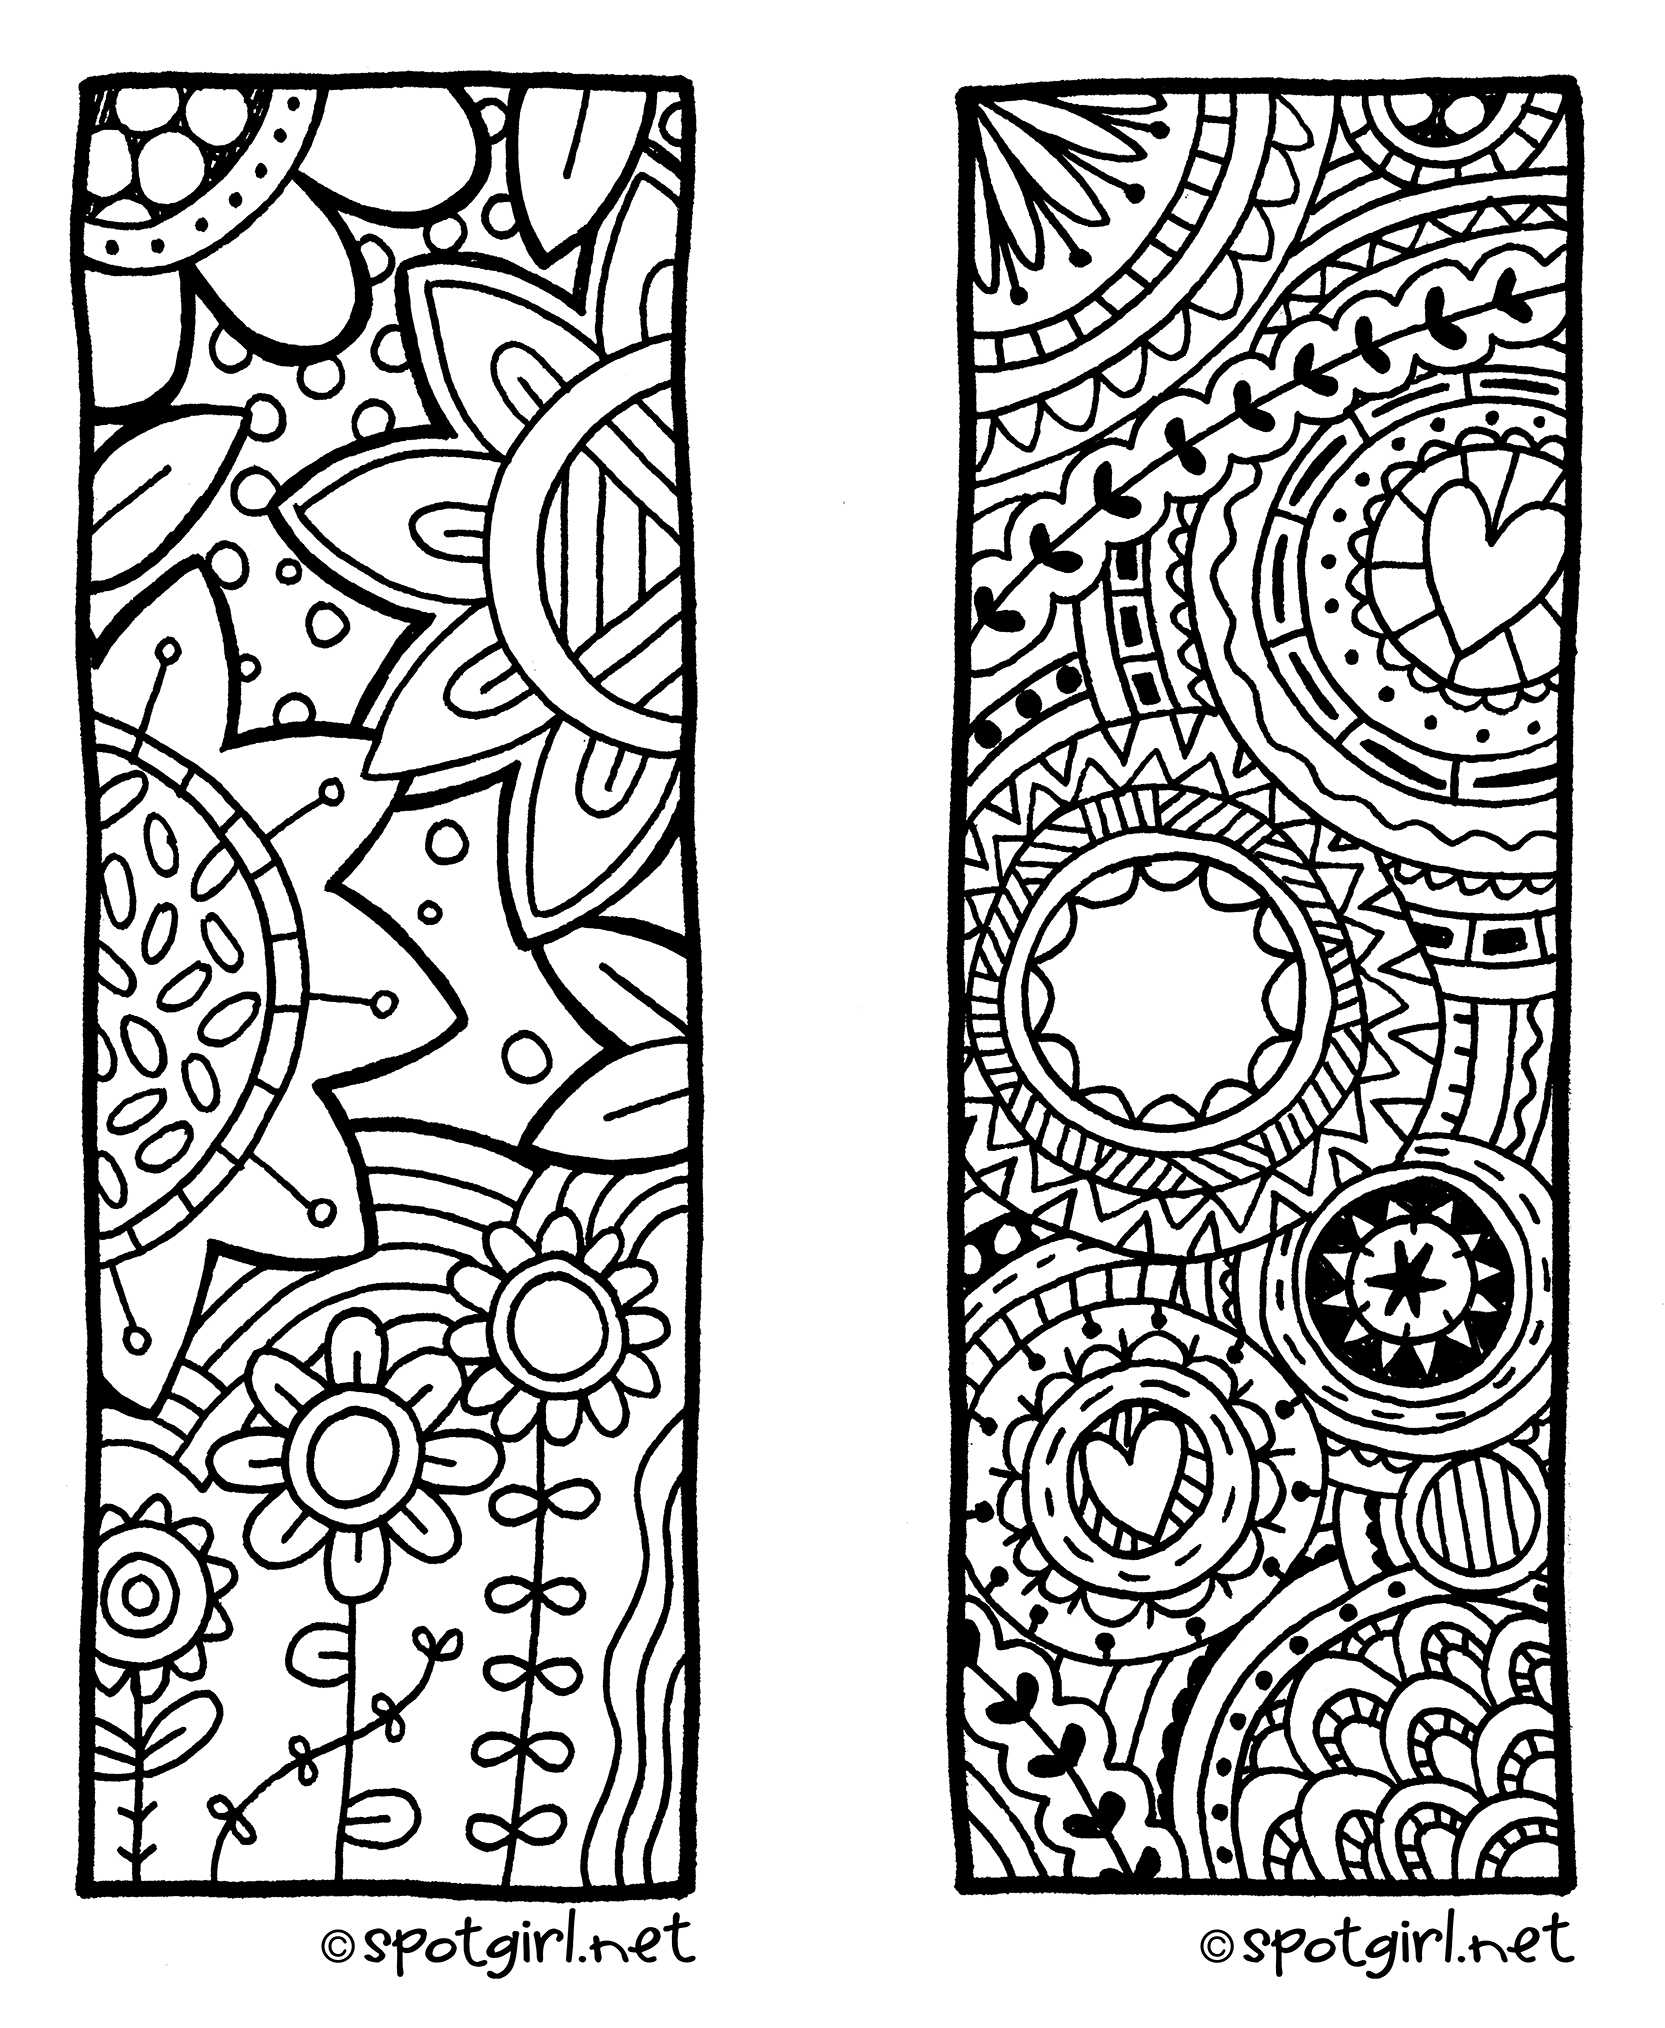 Coloring Pages : Astonishing Freeookmarks To Color Pinterest With Regard To Free Blank Bookmark Templates To Print